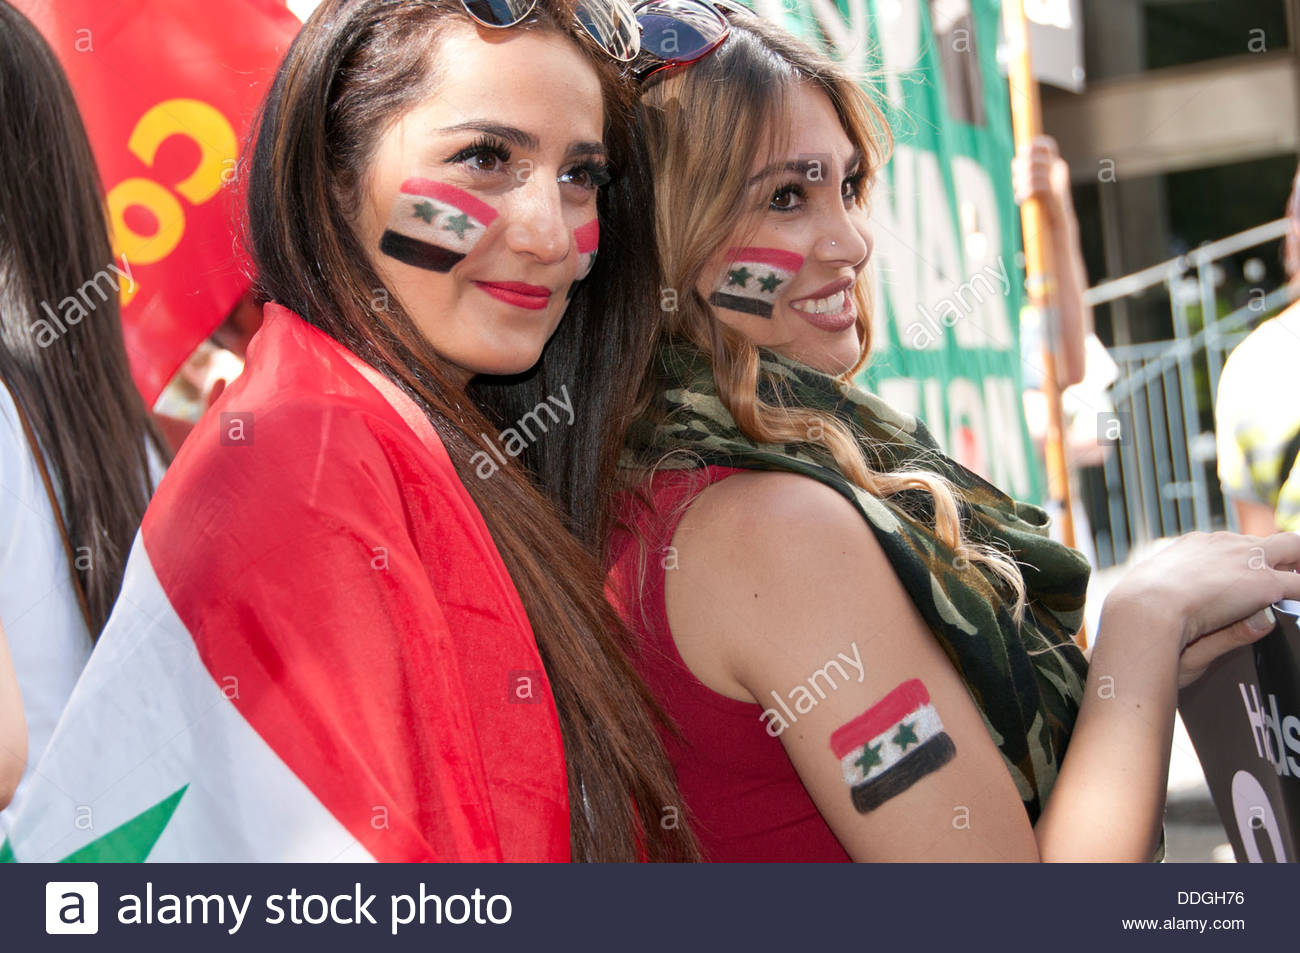 demo-against-intervention-in-syria-young-syrian-women-with-flags-painted-DDGH76.jpg